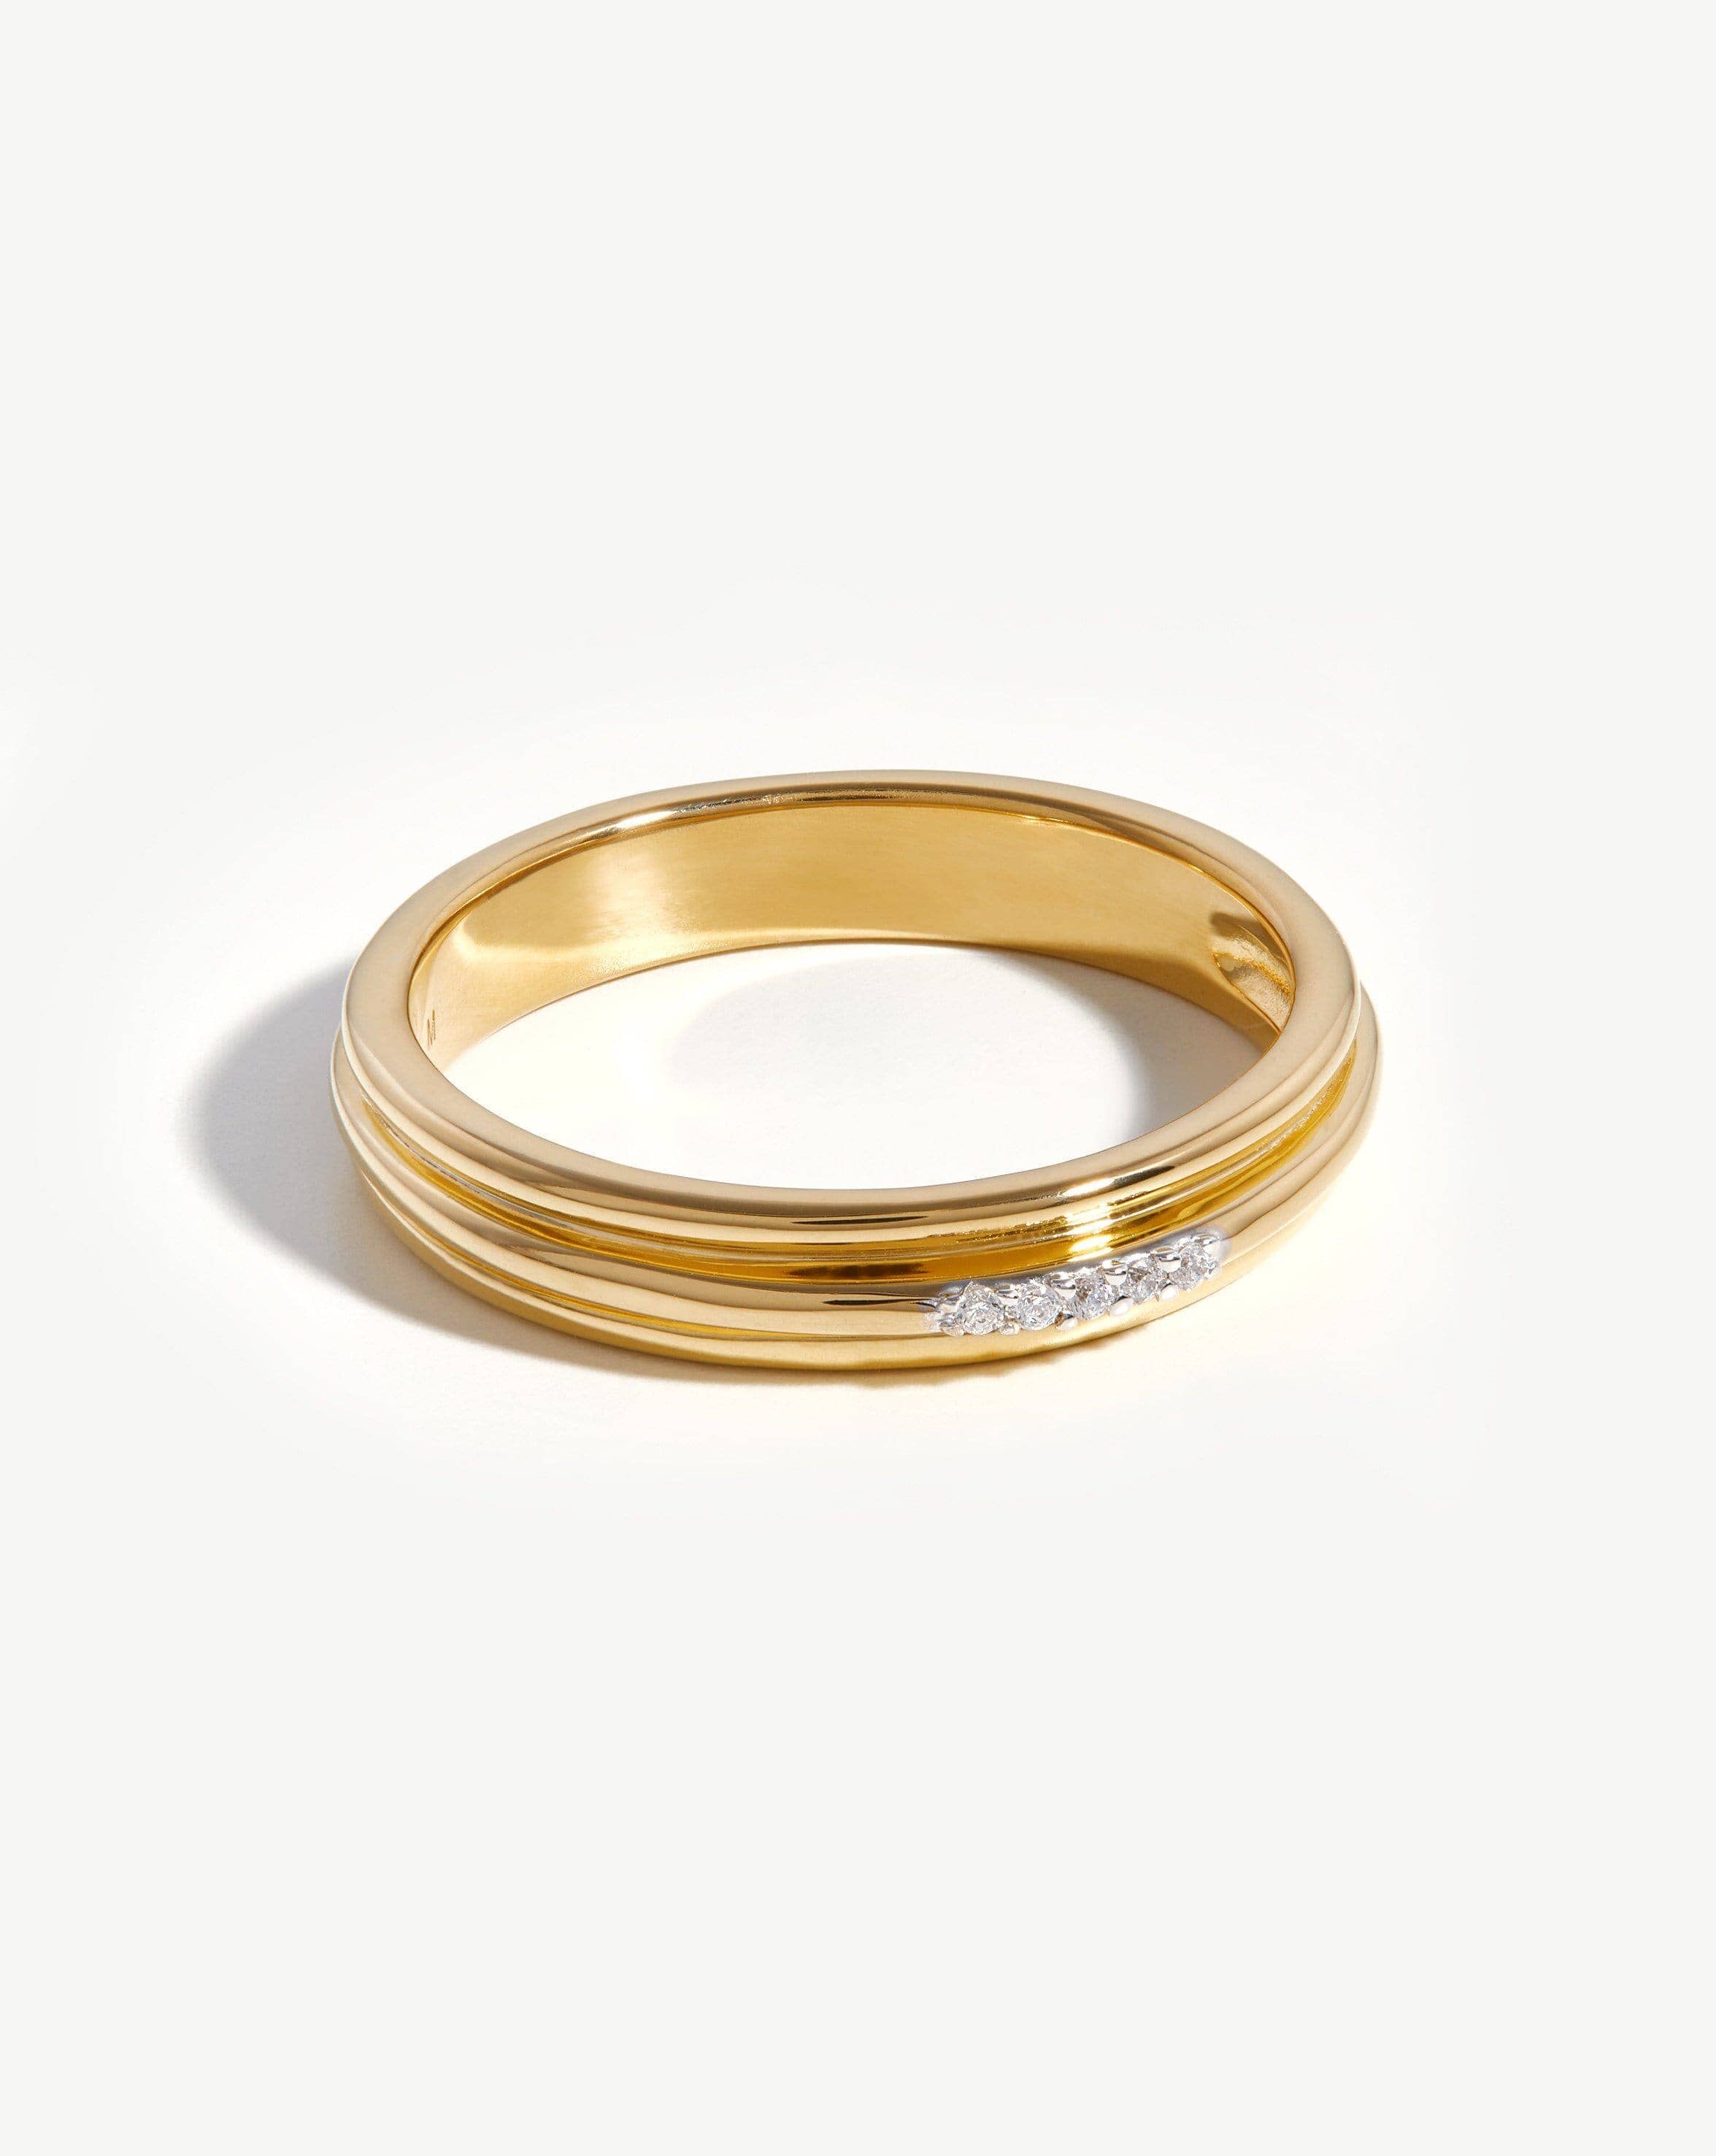 Lucy Williams Pave Ridge Ring | 18ct Gold Plated Vermeil/Cubic Zirconia Rings Missoma 